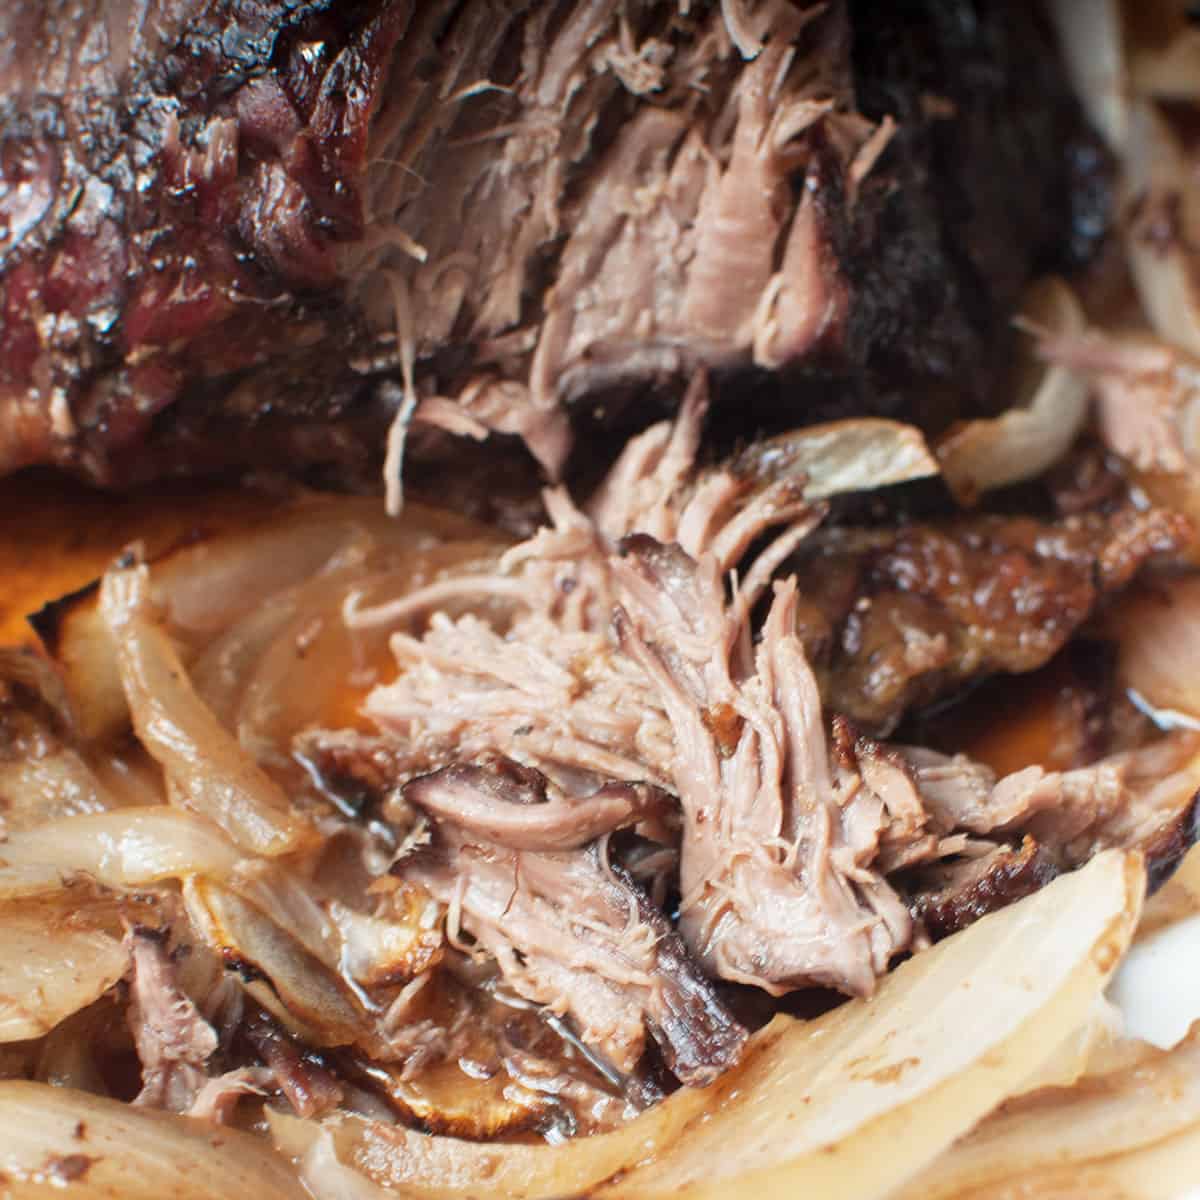 Up close view of shredded pot roast and onion.